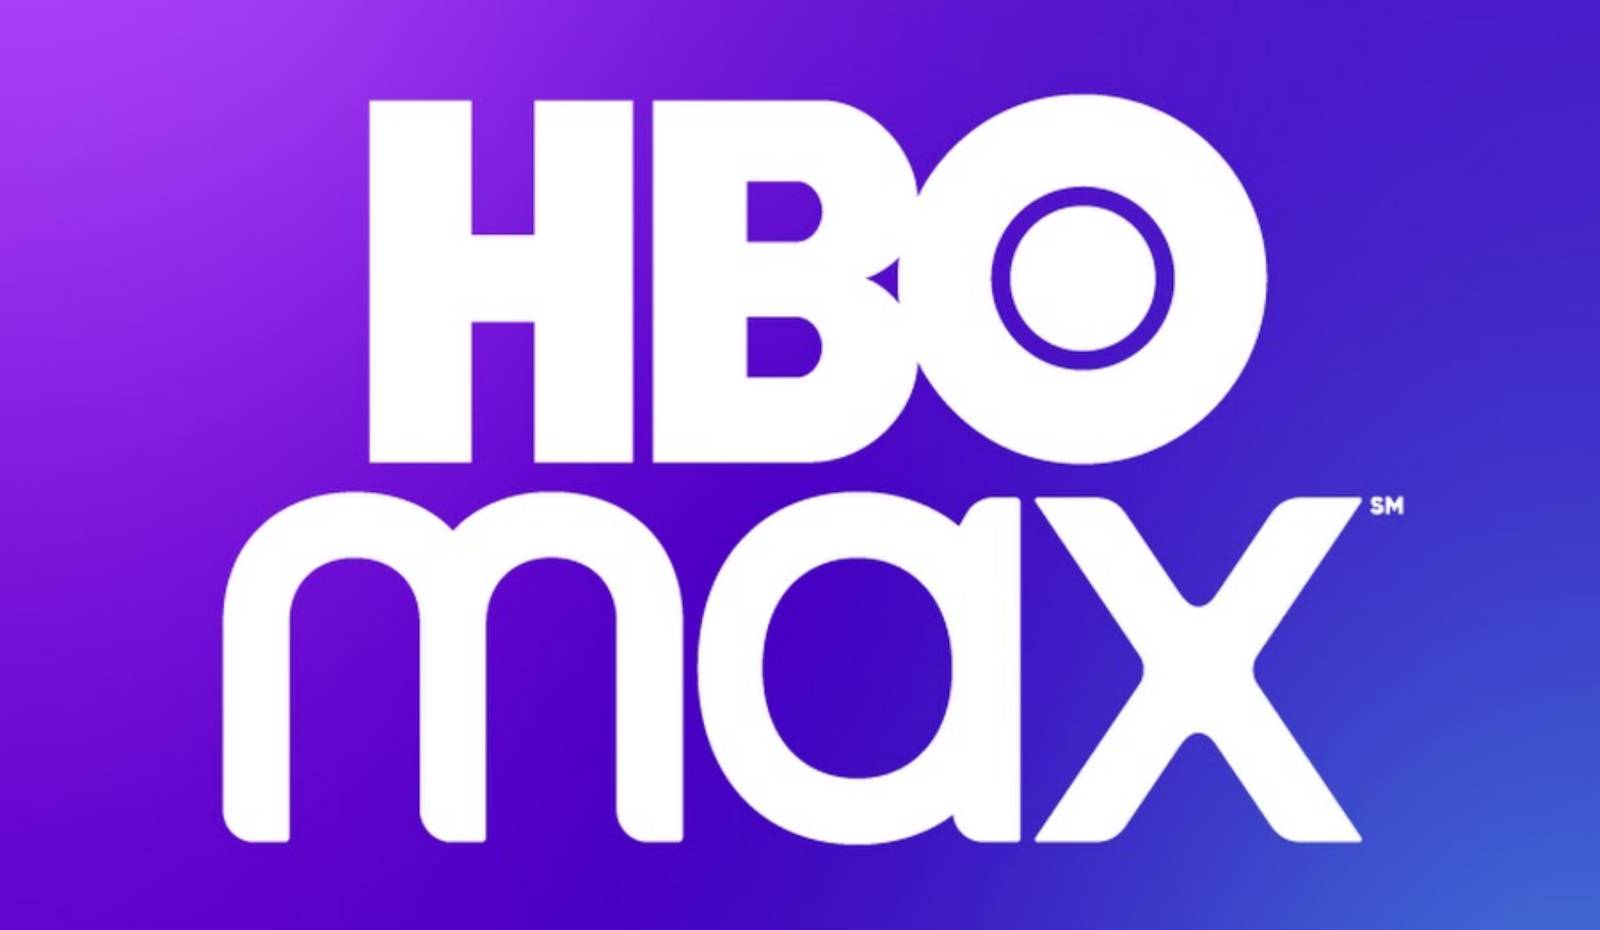 HBO Max streaming